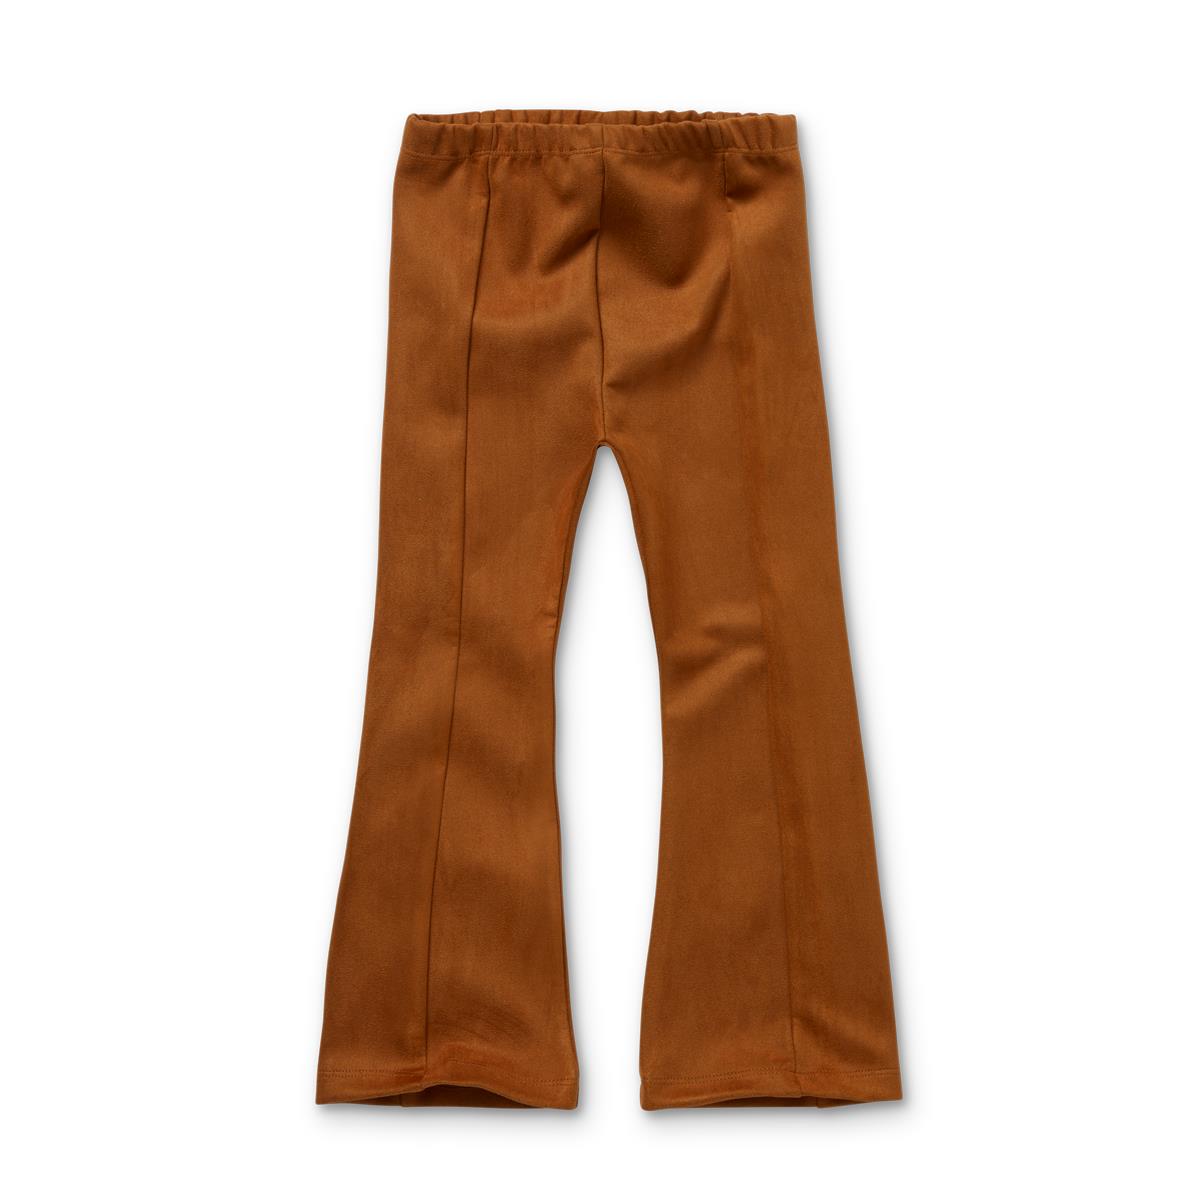 SPROET & SPROUT - Suede flair pants